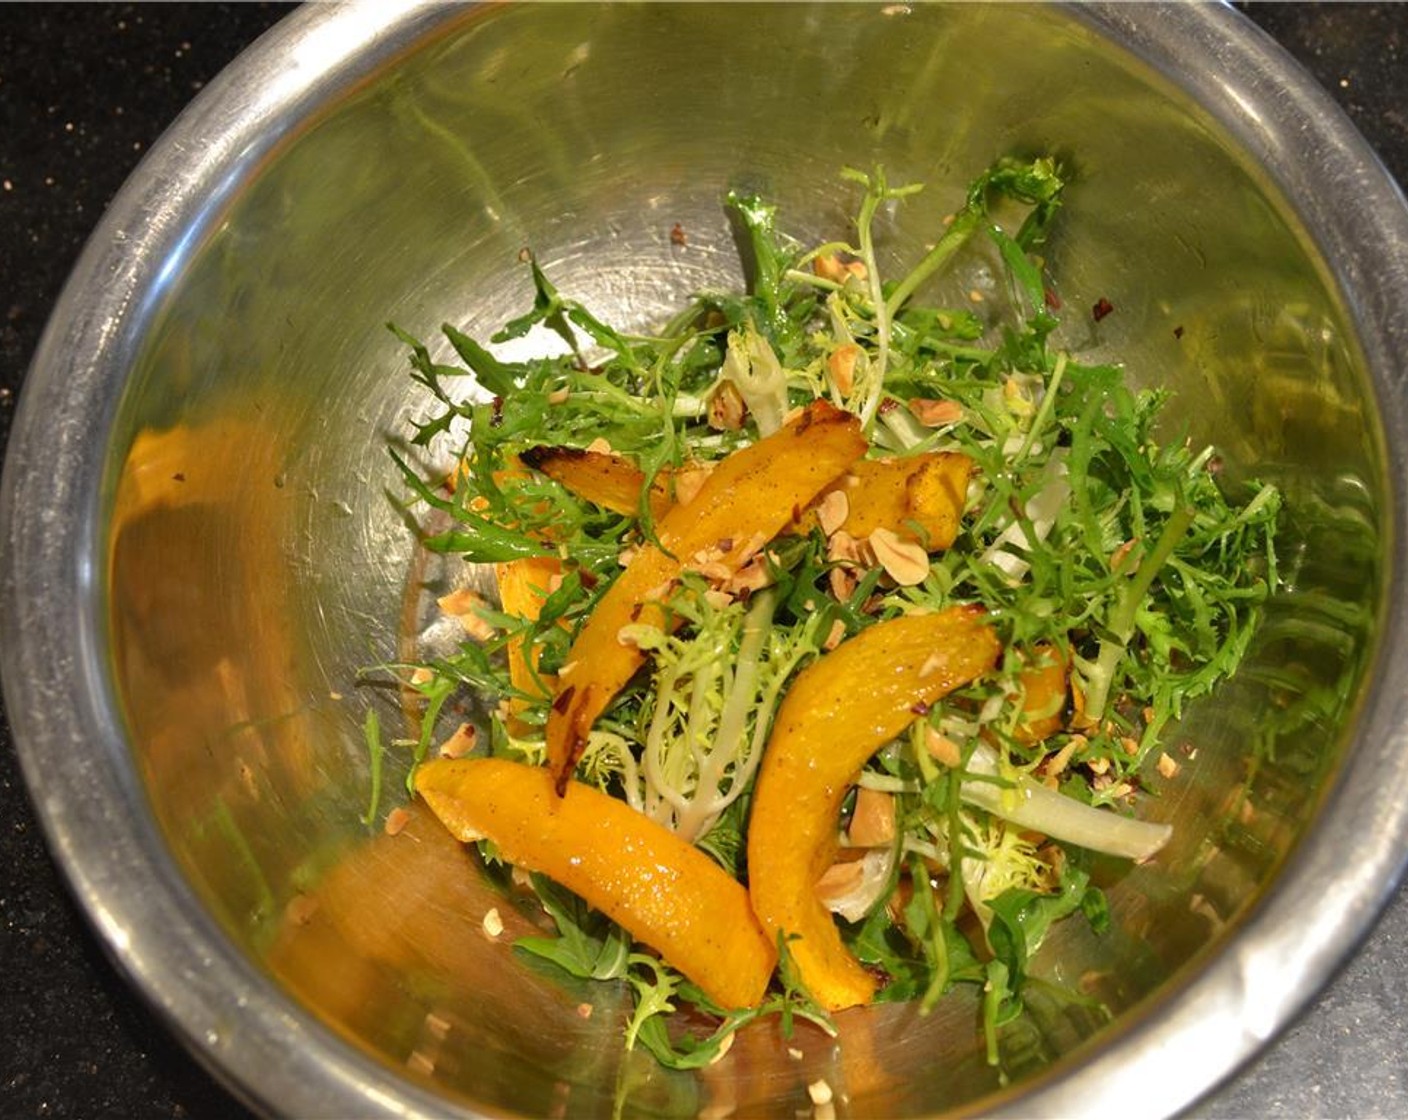 step 10 Lightly crush the Hazelnuts (1 Tbsp) and place them in a large mixing bowl with the Arugula (1 bunch), Curly Endive (1 handful), Pumpkin Seeds (1 Tbsp), and warm squash wedges.